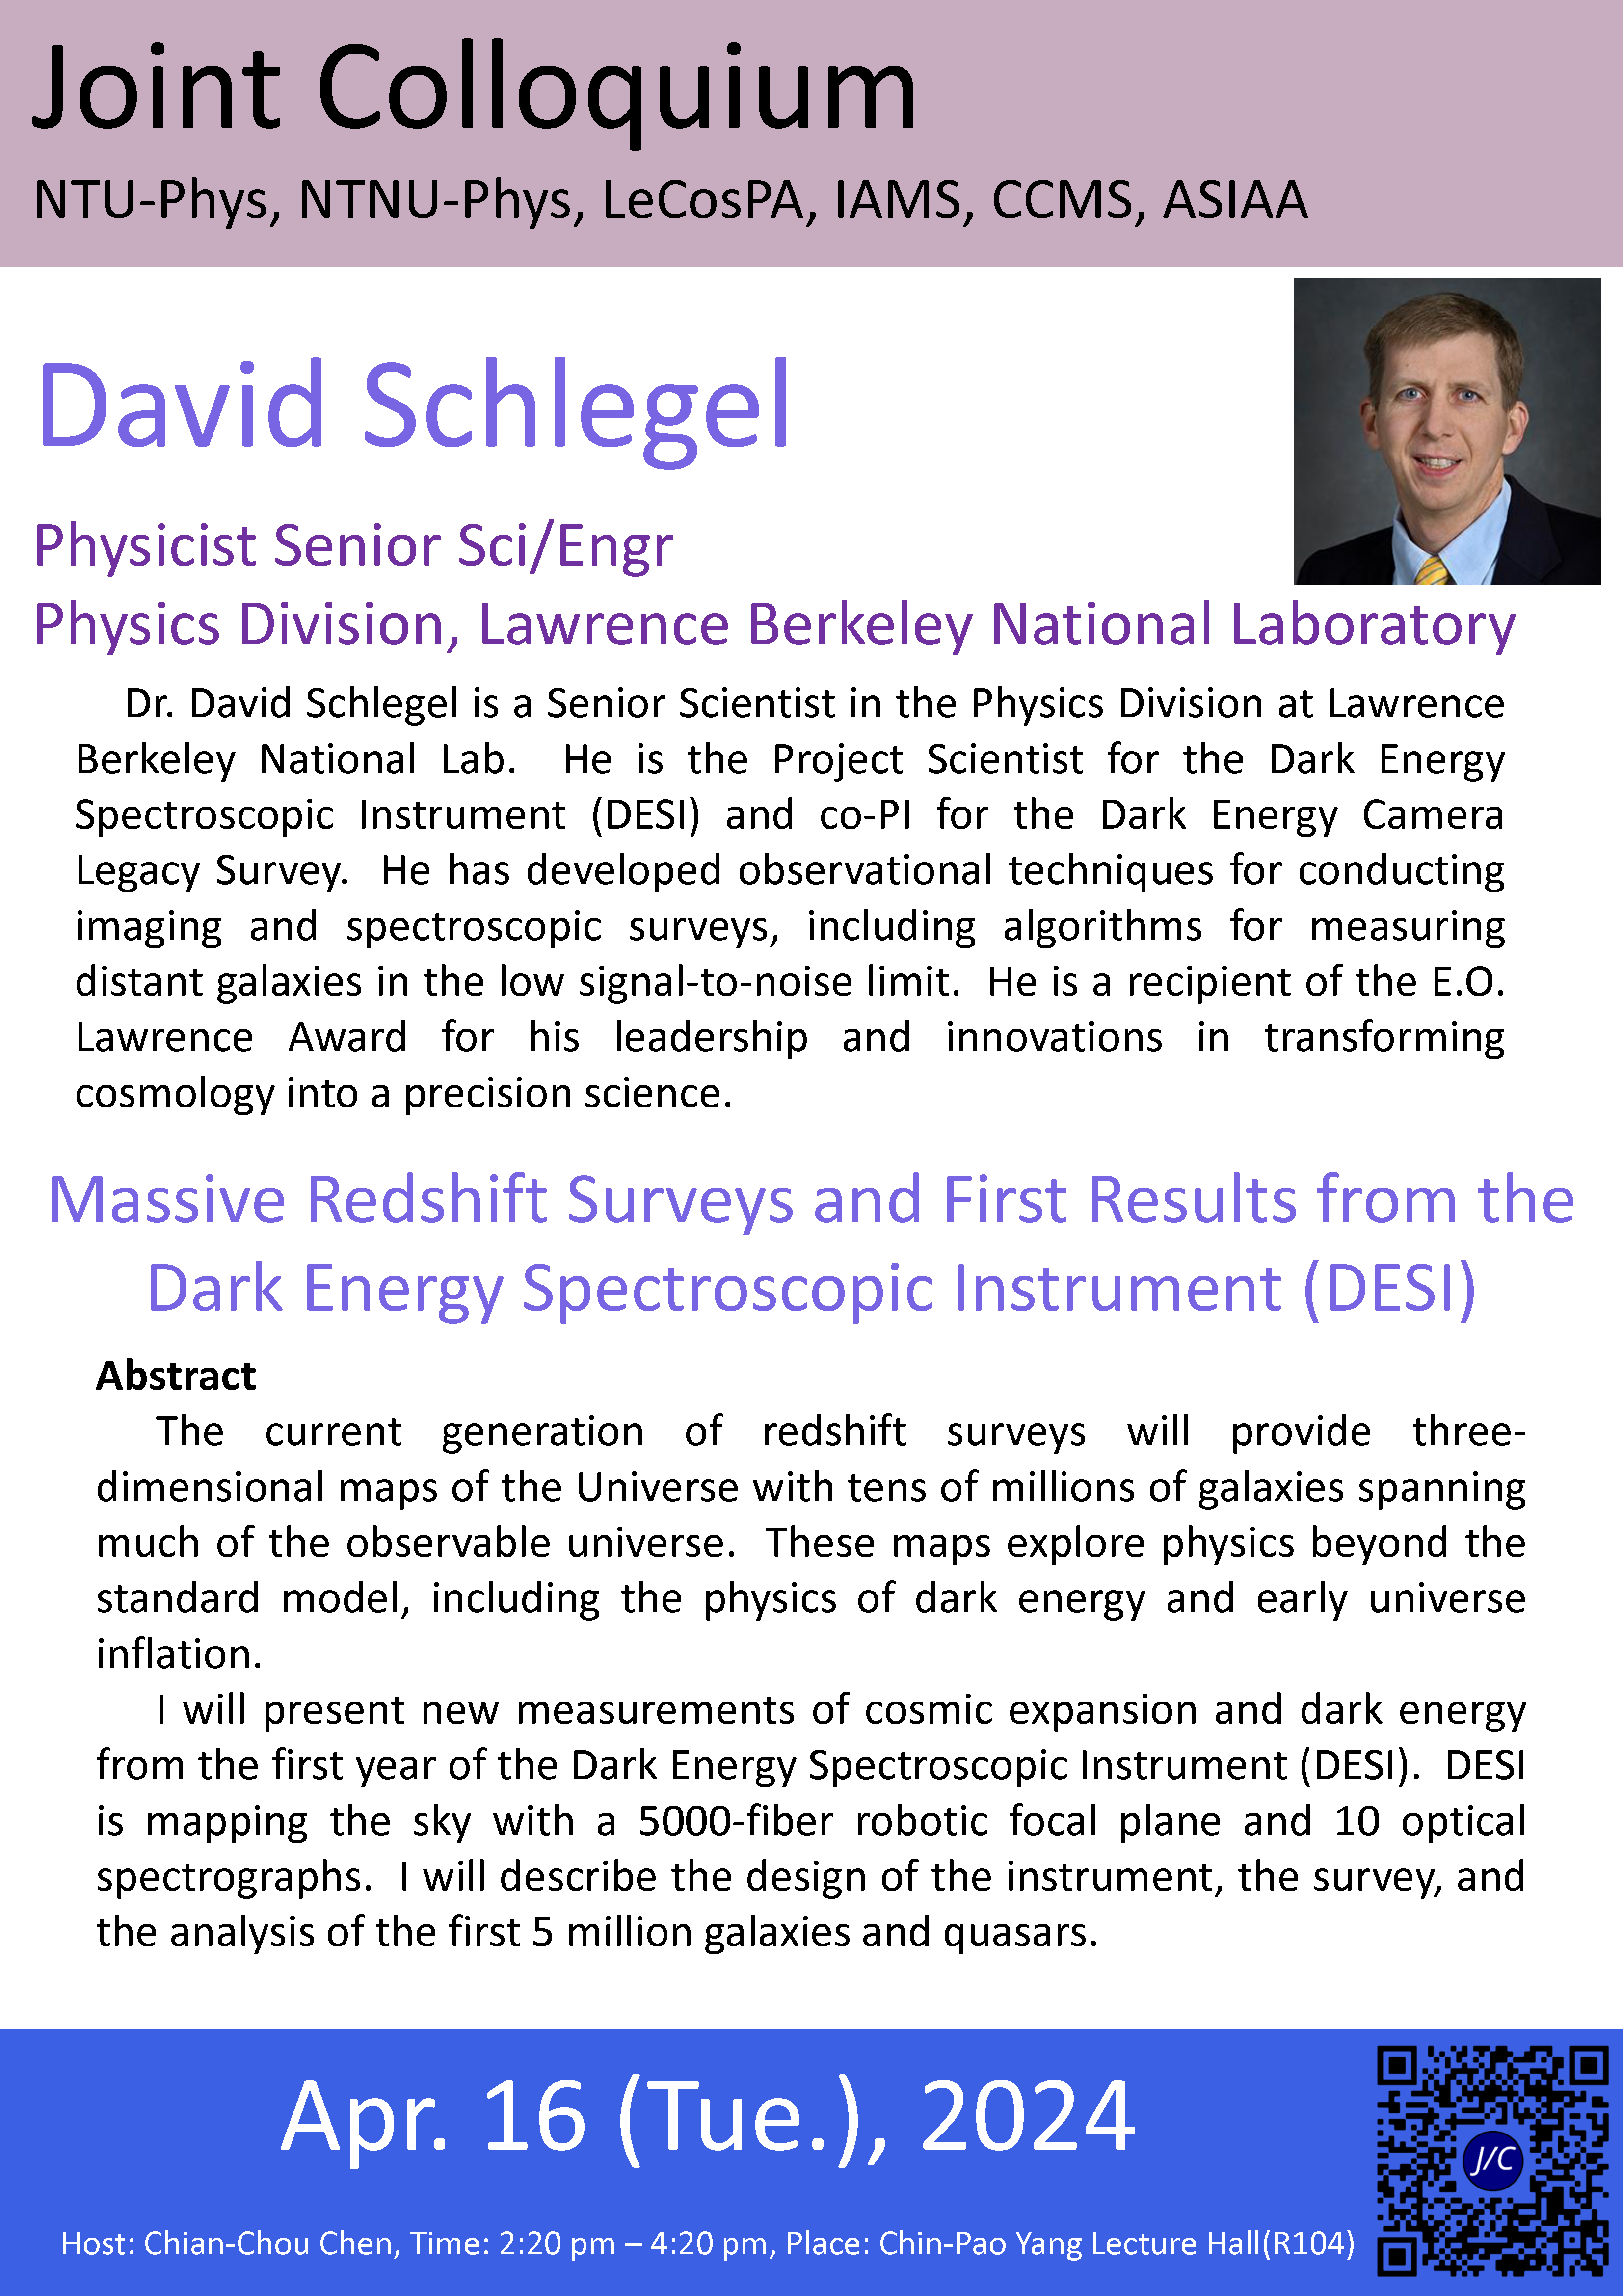 Massive Redshift Surveys and First Results from the Dark Energy Spectroscopic Instrument (DESI)